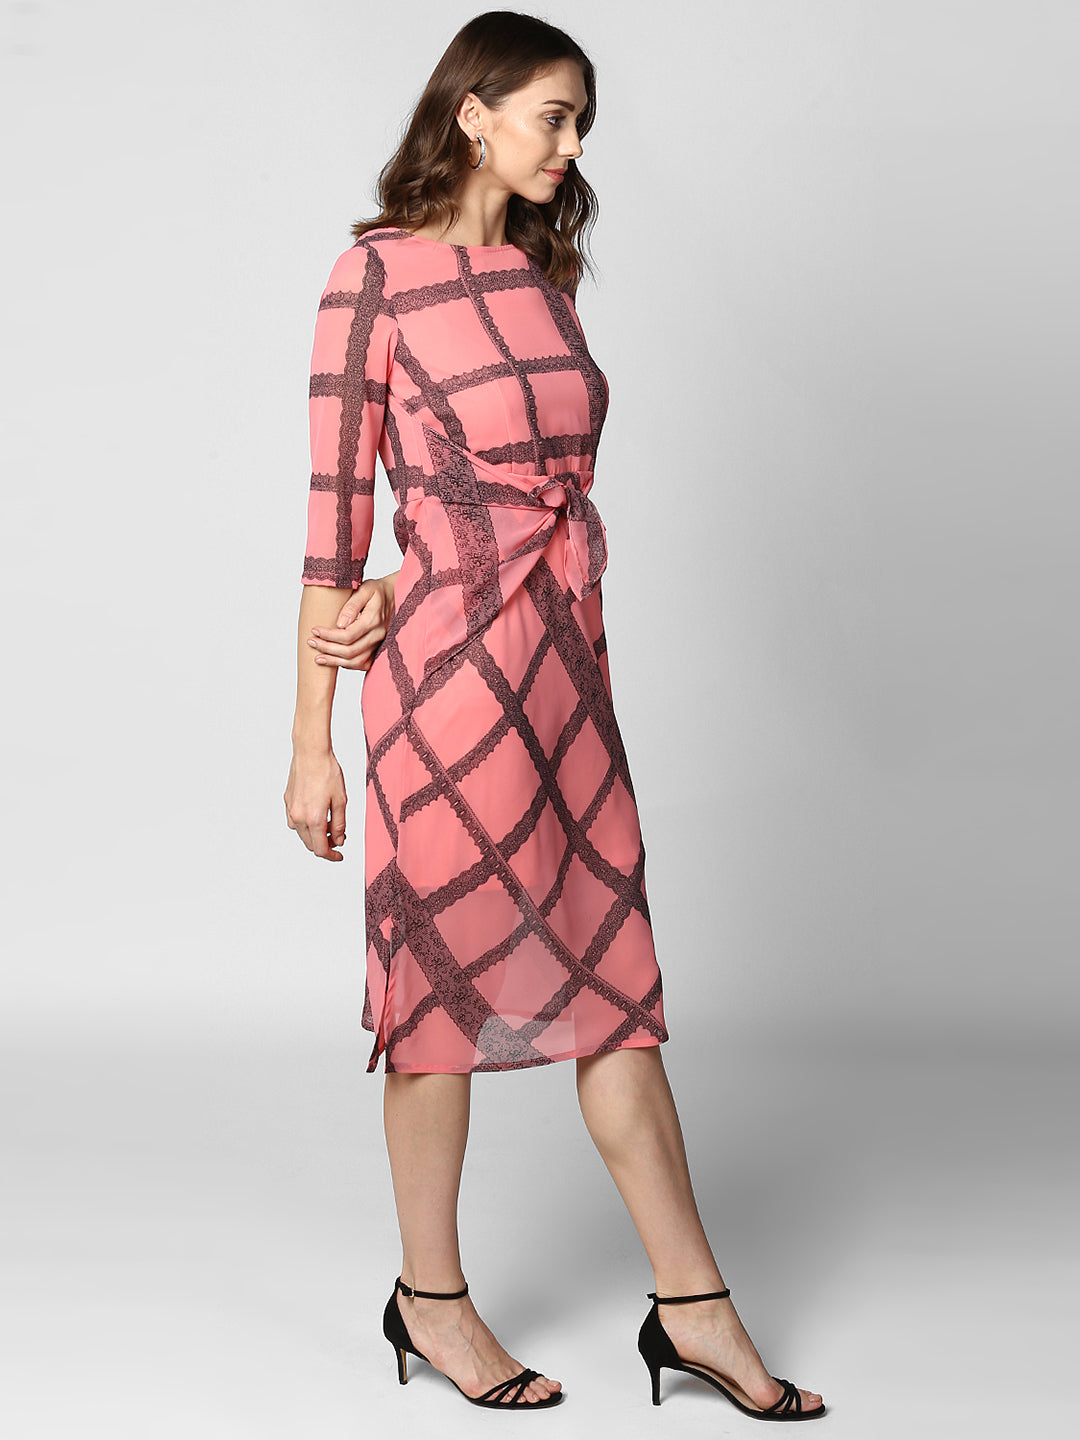 Women's Pink Check Waist Tie Up Polyester Dress with Lining